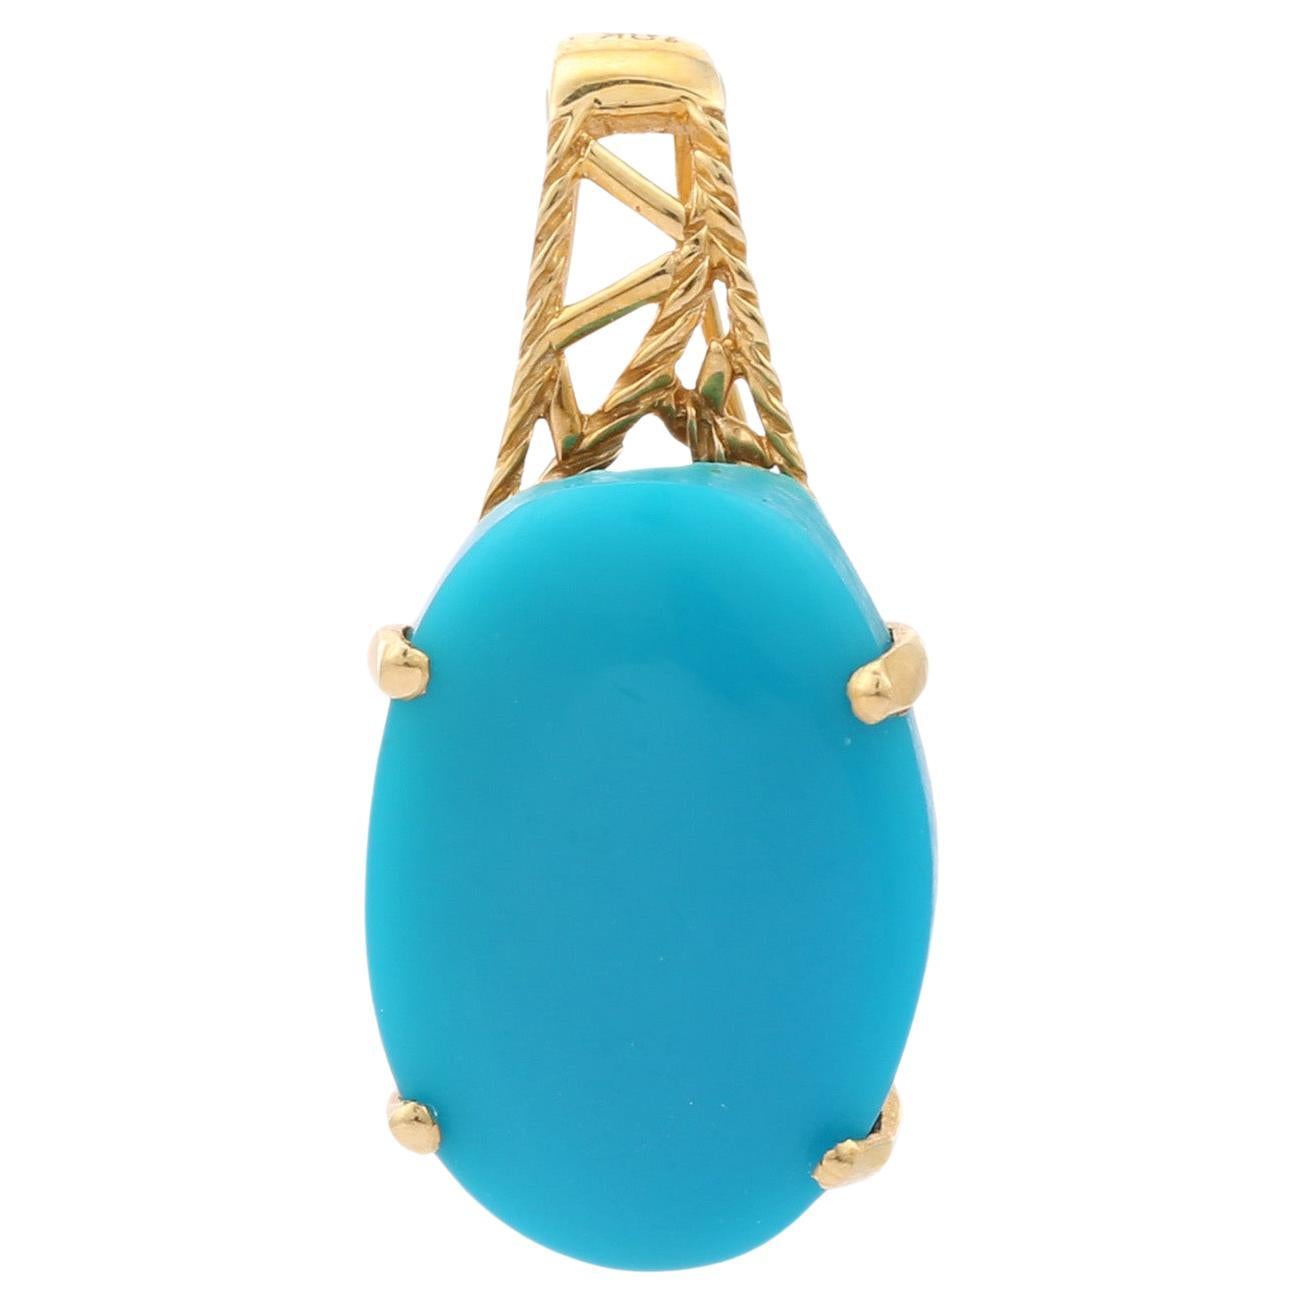 Turquoise pendant in 18K Gold. It has a oval cut gemstone that completes your look with a decent touch. Pendants are used to wear or gifted to represent love and promises. It's an attractive jewelry piece that goes with every basic outfit and